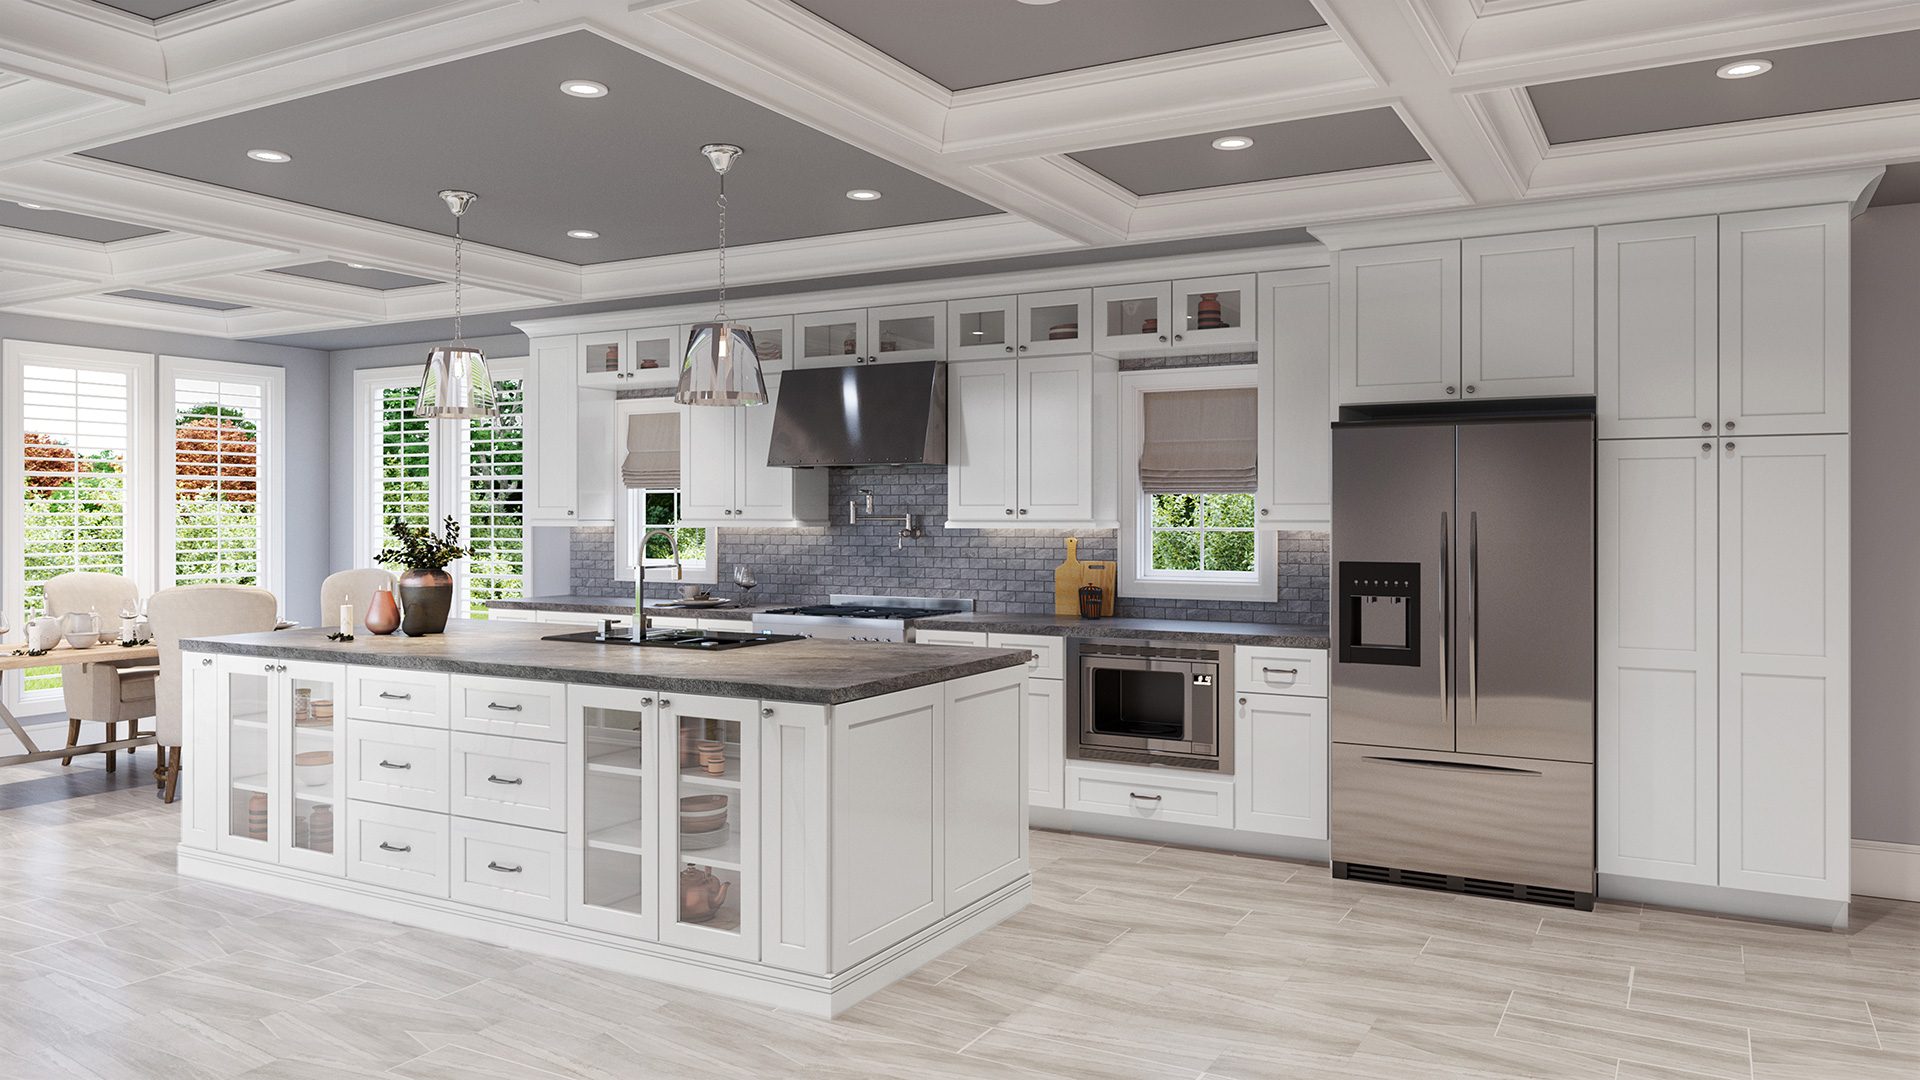 Reasons To Design Kitchens With Shaker Cabinets In Cabinetcorp